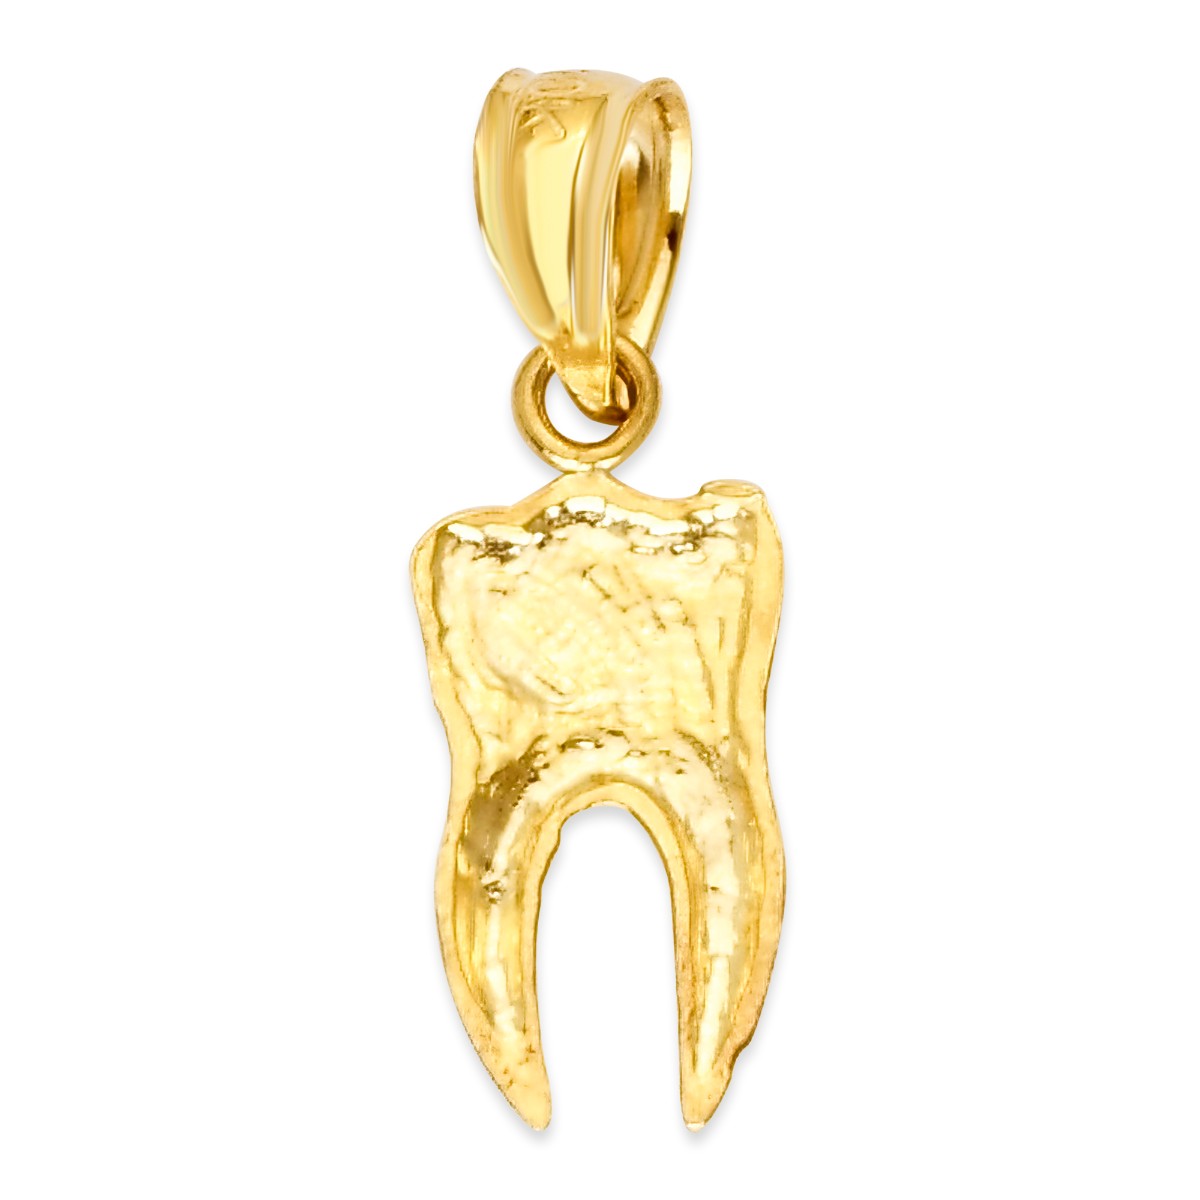 Solid Gold Tooth Pendant - 10k or 14k